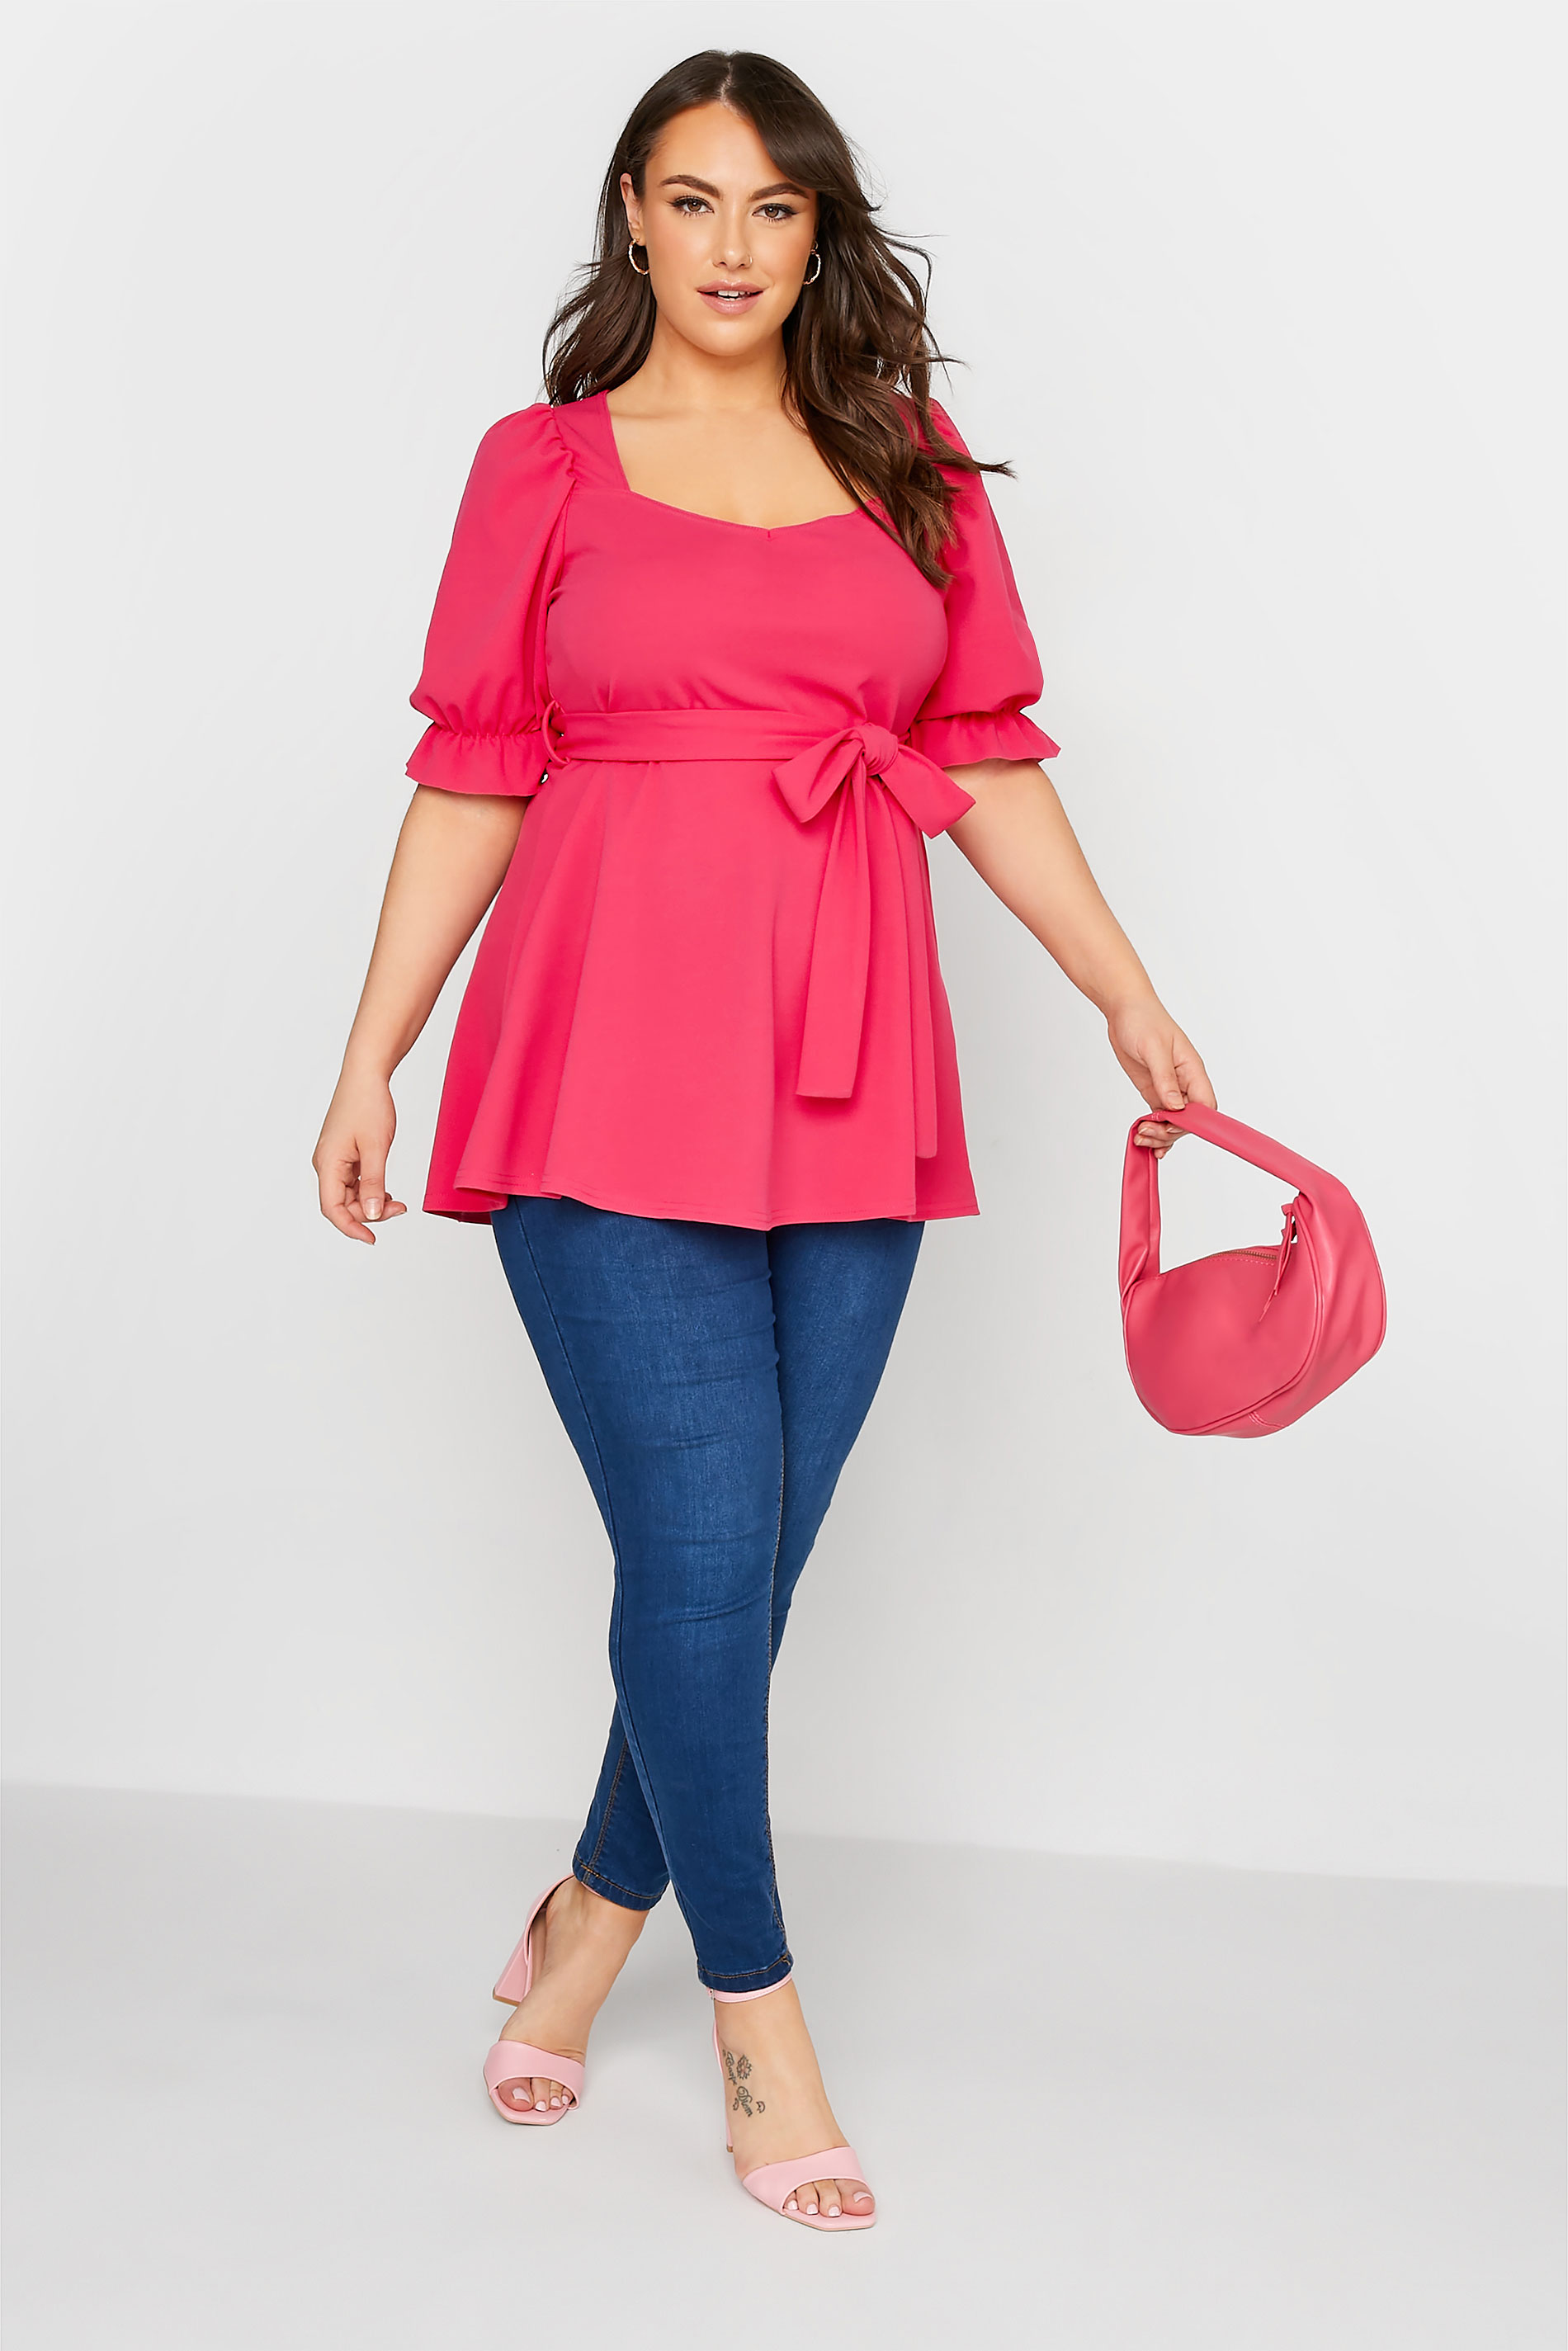 Grande taille  Tops Grande taille  Tops Péplum | YOURS LONDON - Top Rose Peplum Manches Bouffantes - DF58995